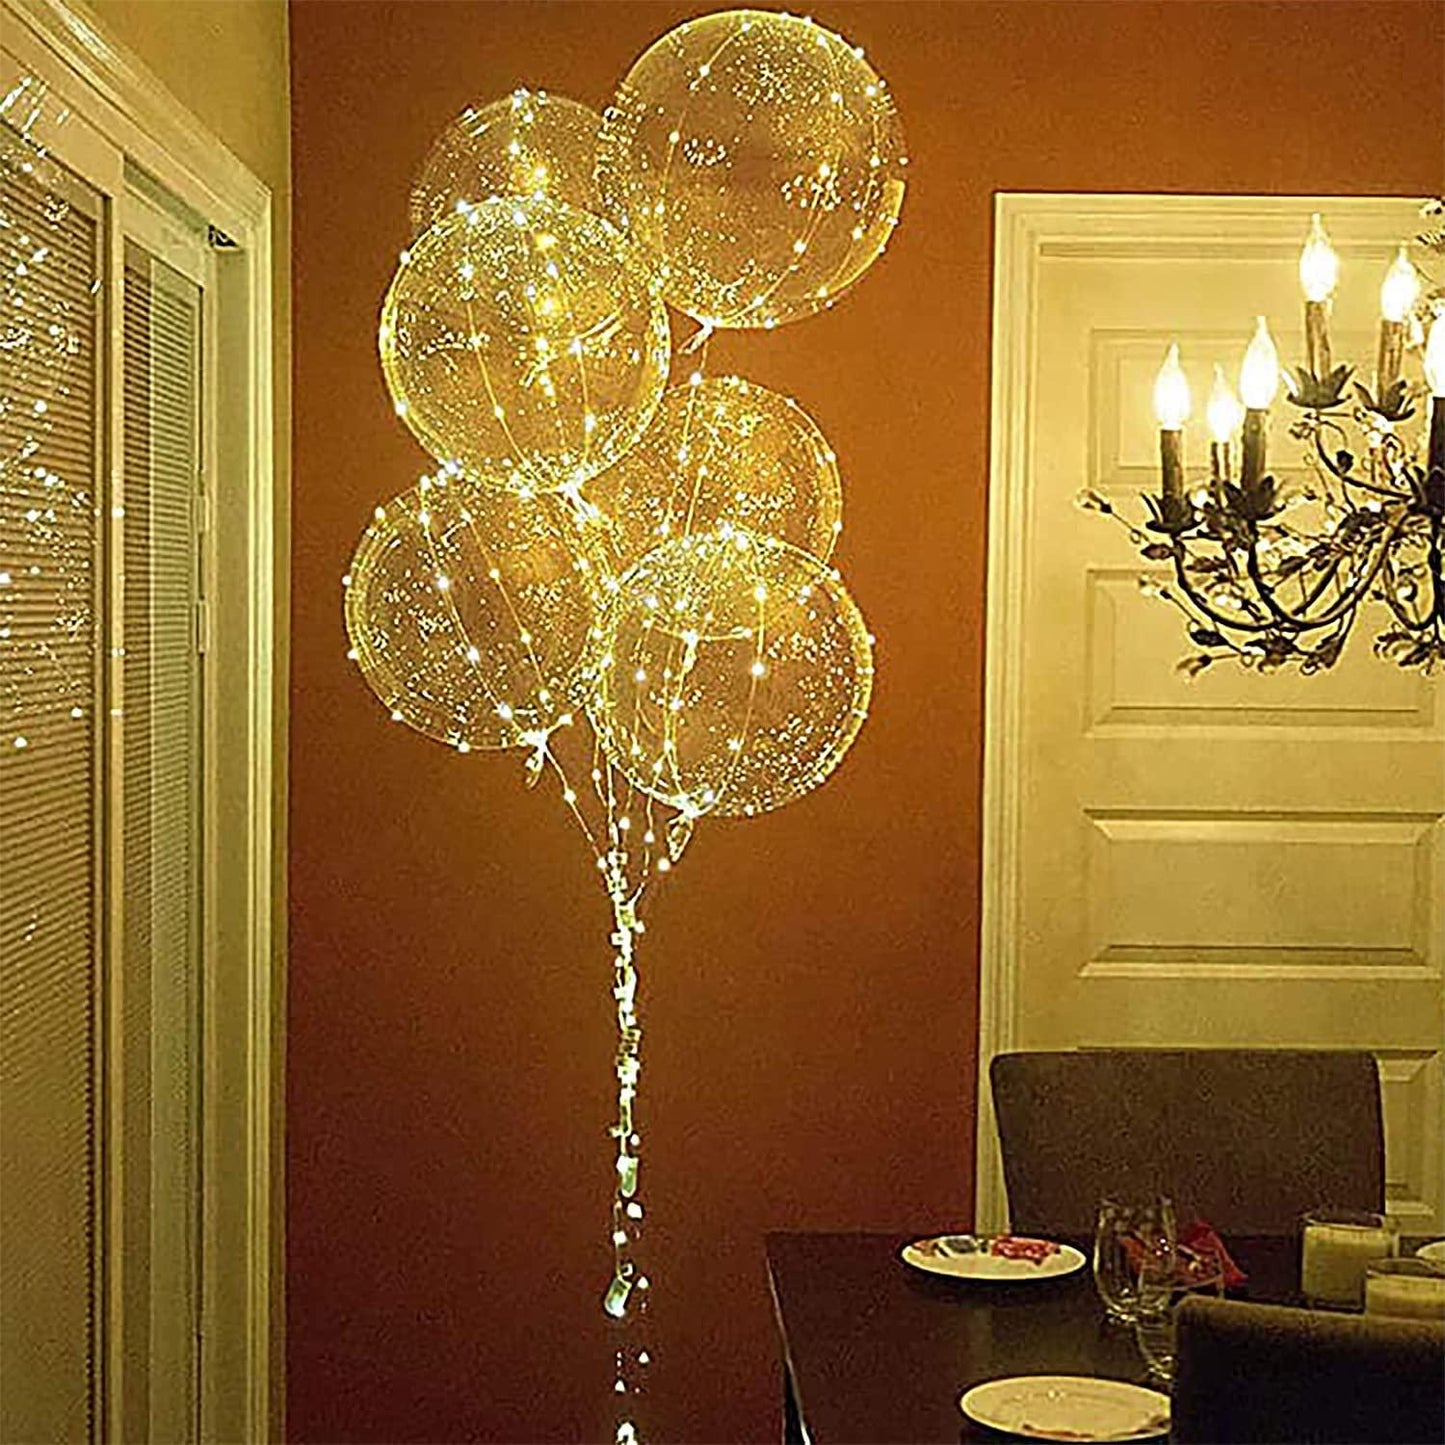 18inch Led Balloon Decorations for Holiday and Theme Party - If you say i do